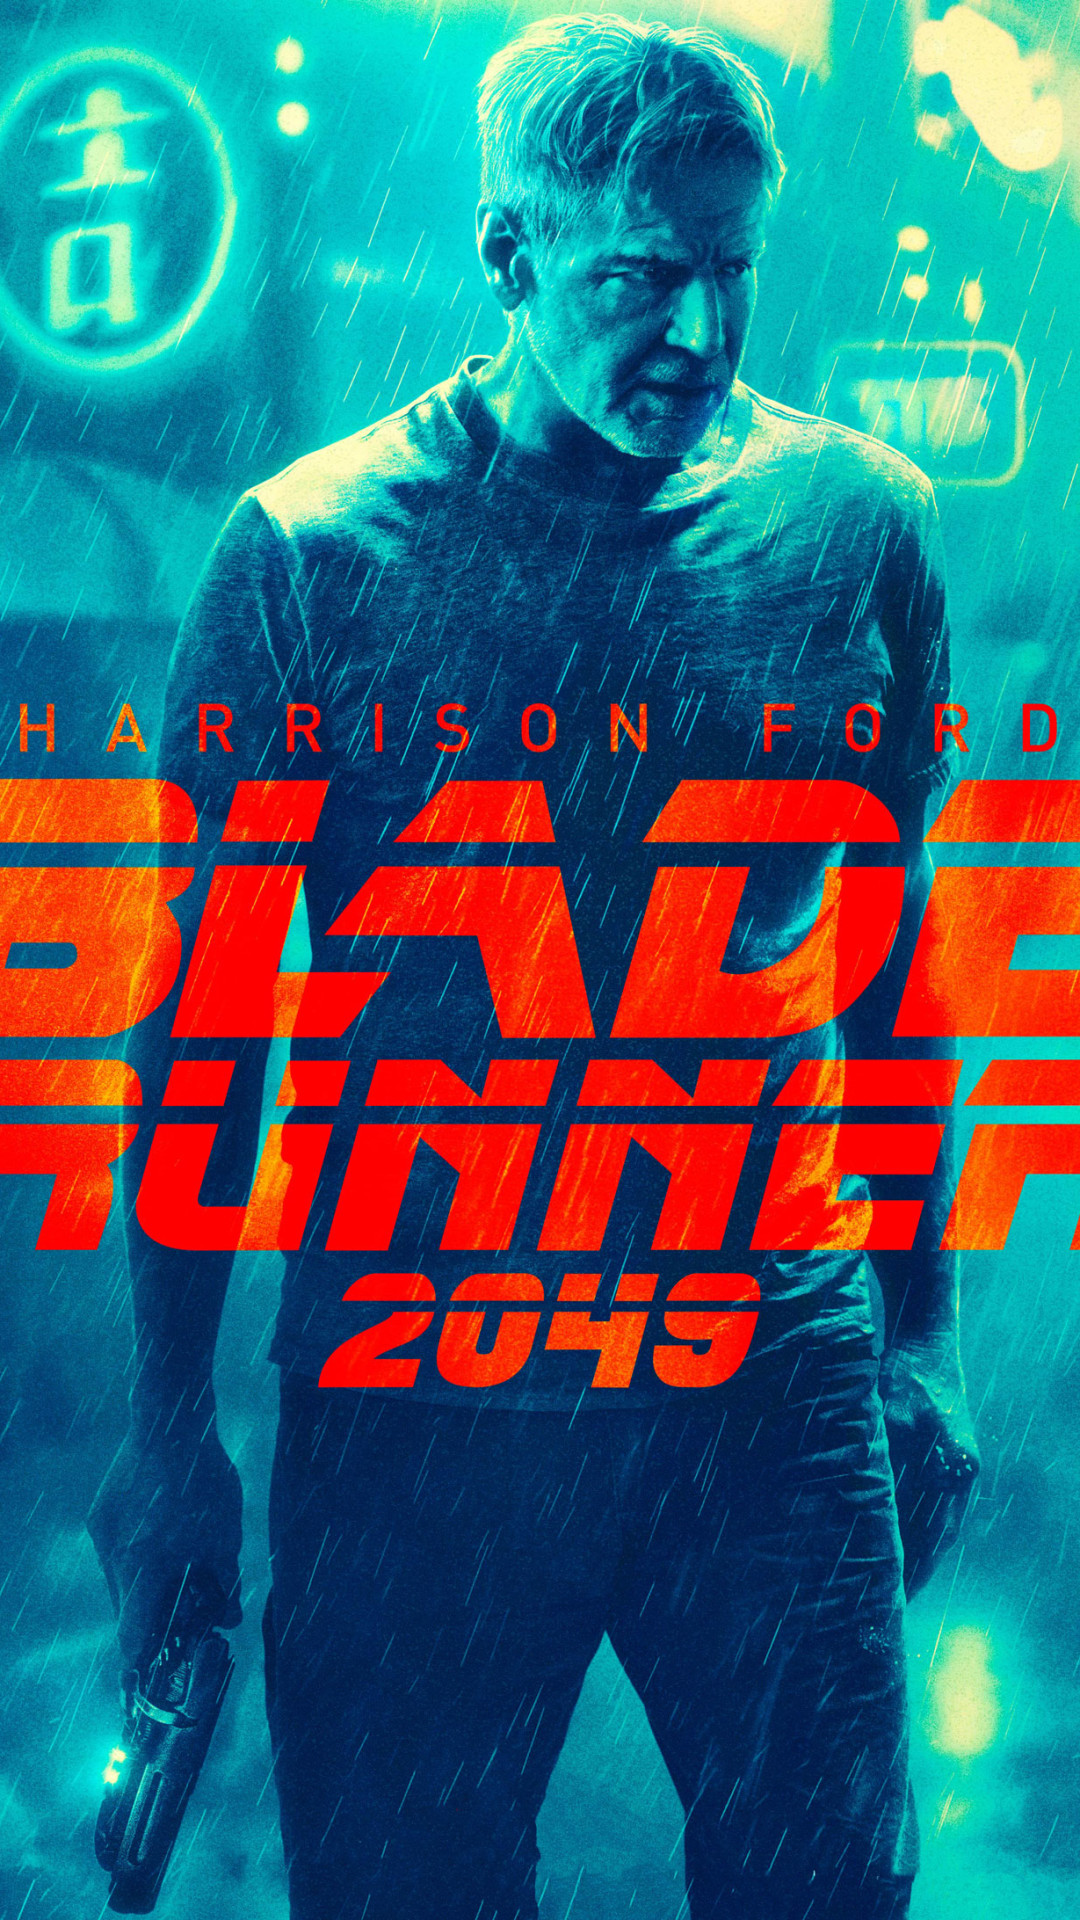 blade runner iphone wallpaper,text,album cover,movie,font,poster